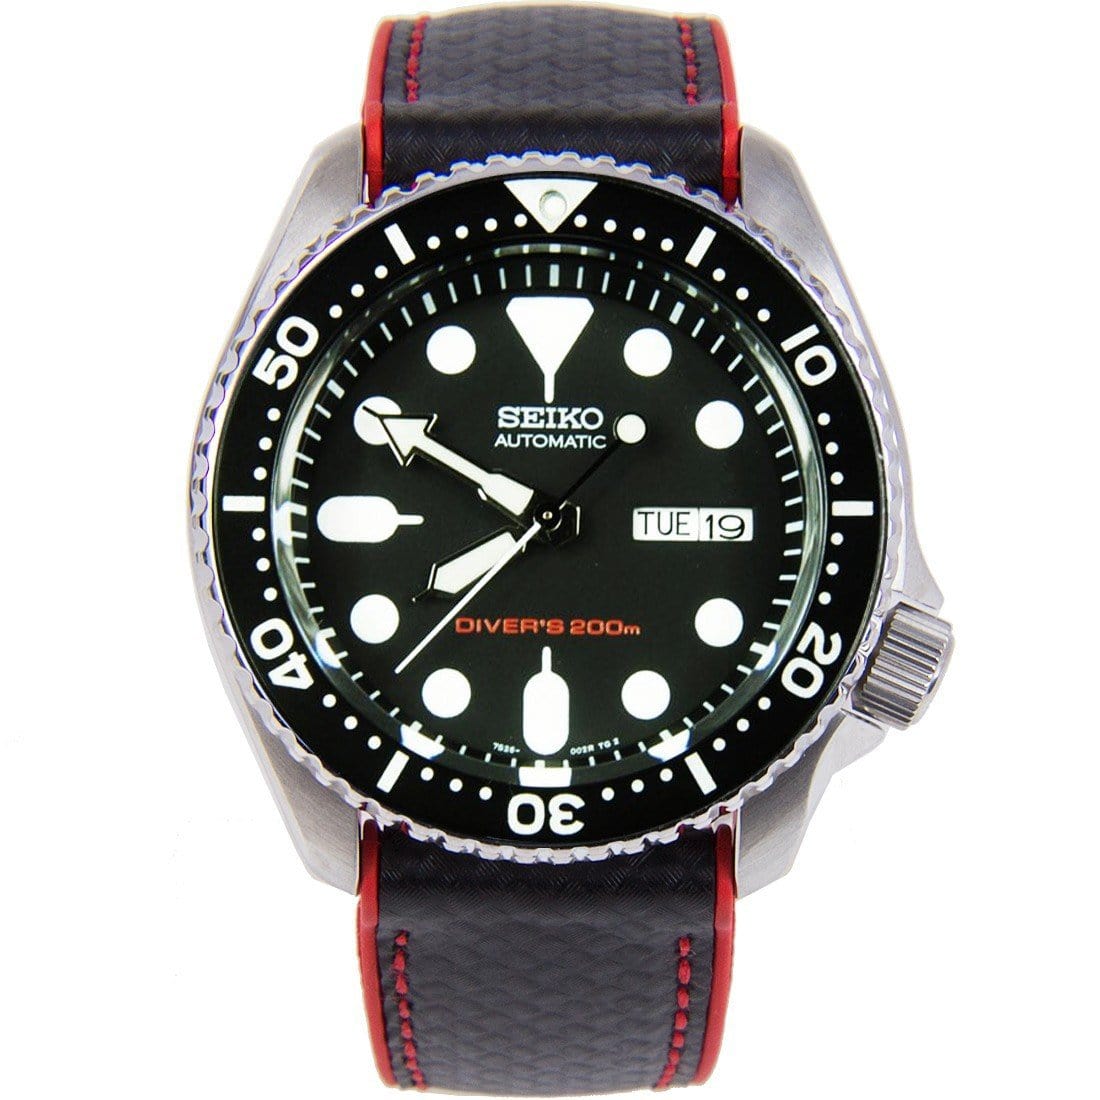 SKX007K1 SKX007 Seiko Automatic Analog Mens Dive Watch with Extra Strap